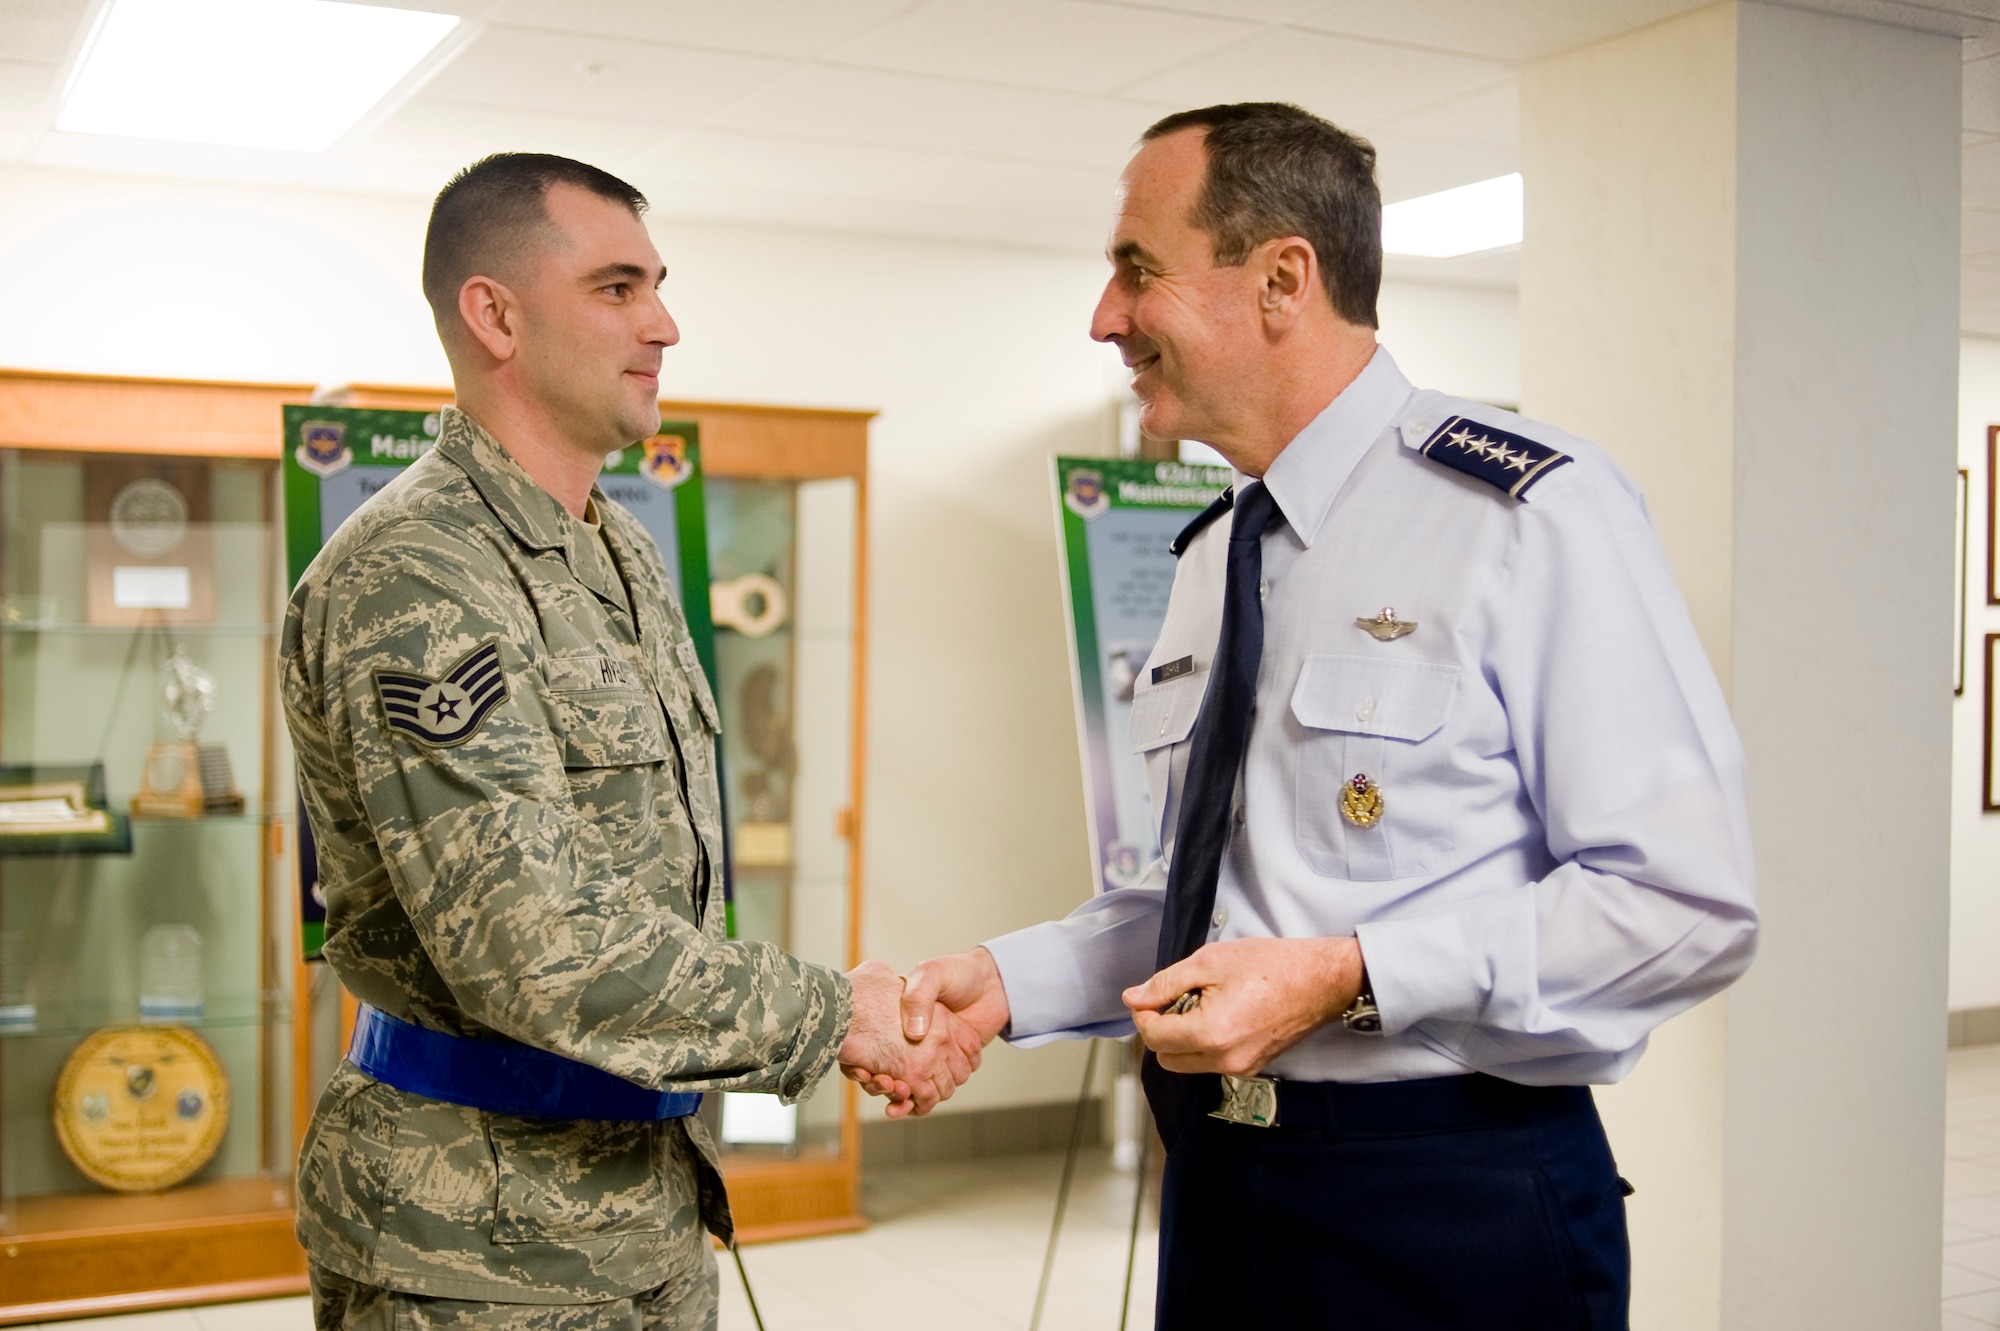 Gen. Raymond E. Johns, Jr., Air Mobility Command Commander, right, "coins" Staff Sgt. Delmer Hively, 62nd Maintenance Operations Squadron, while visiting the 62nd Airlift Wing headquarters building Monday. Gen Johns attended a joint basing briefing, met with McChord Airmen and civilians, and walked through the customer service mall during his tour of building 100. (U.S. Air Force Photo/Abner Guzman)